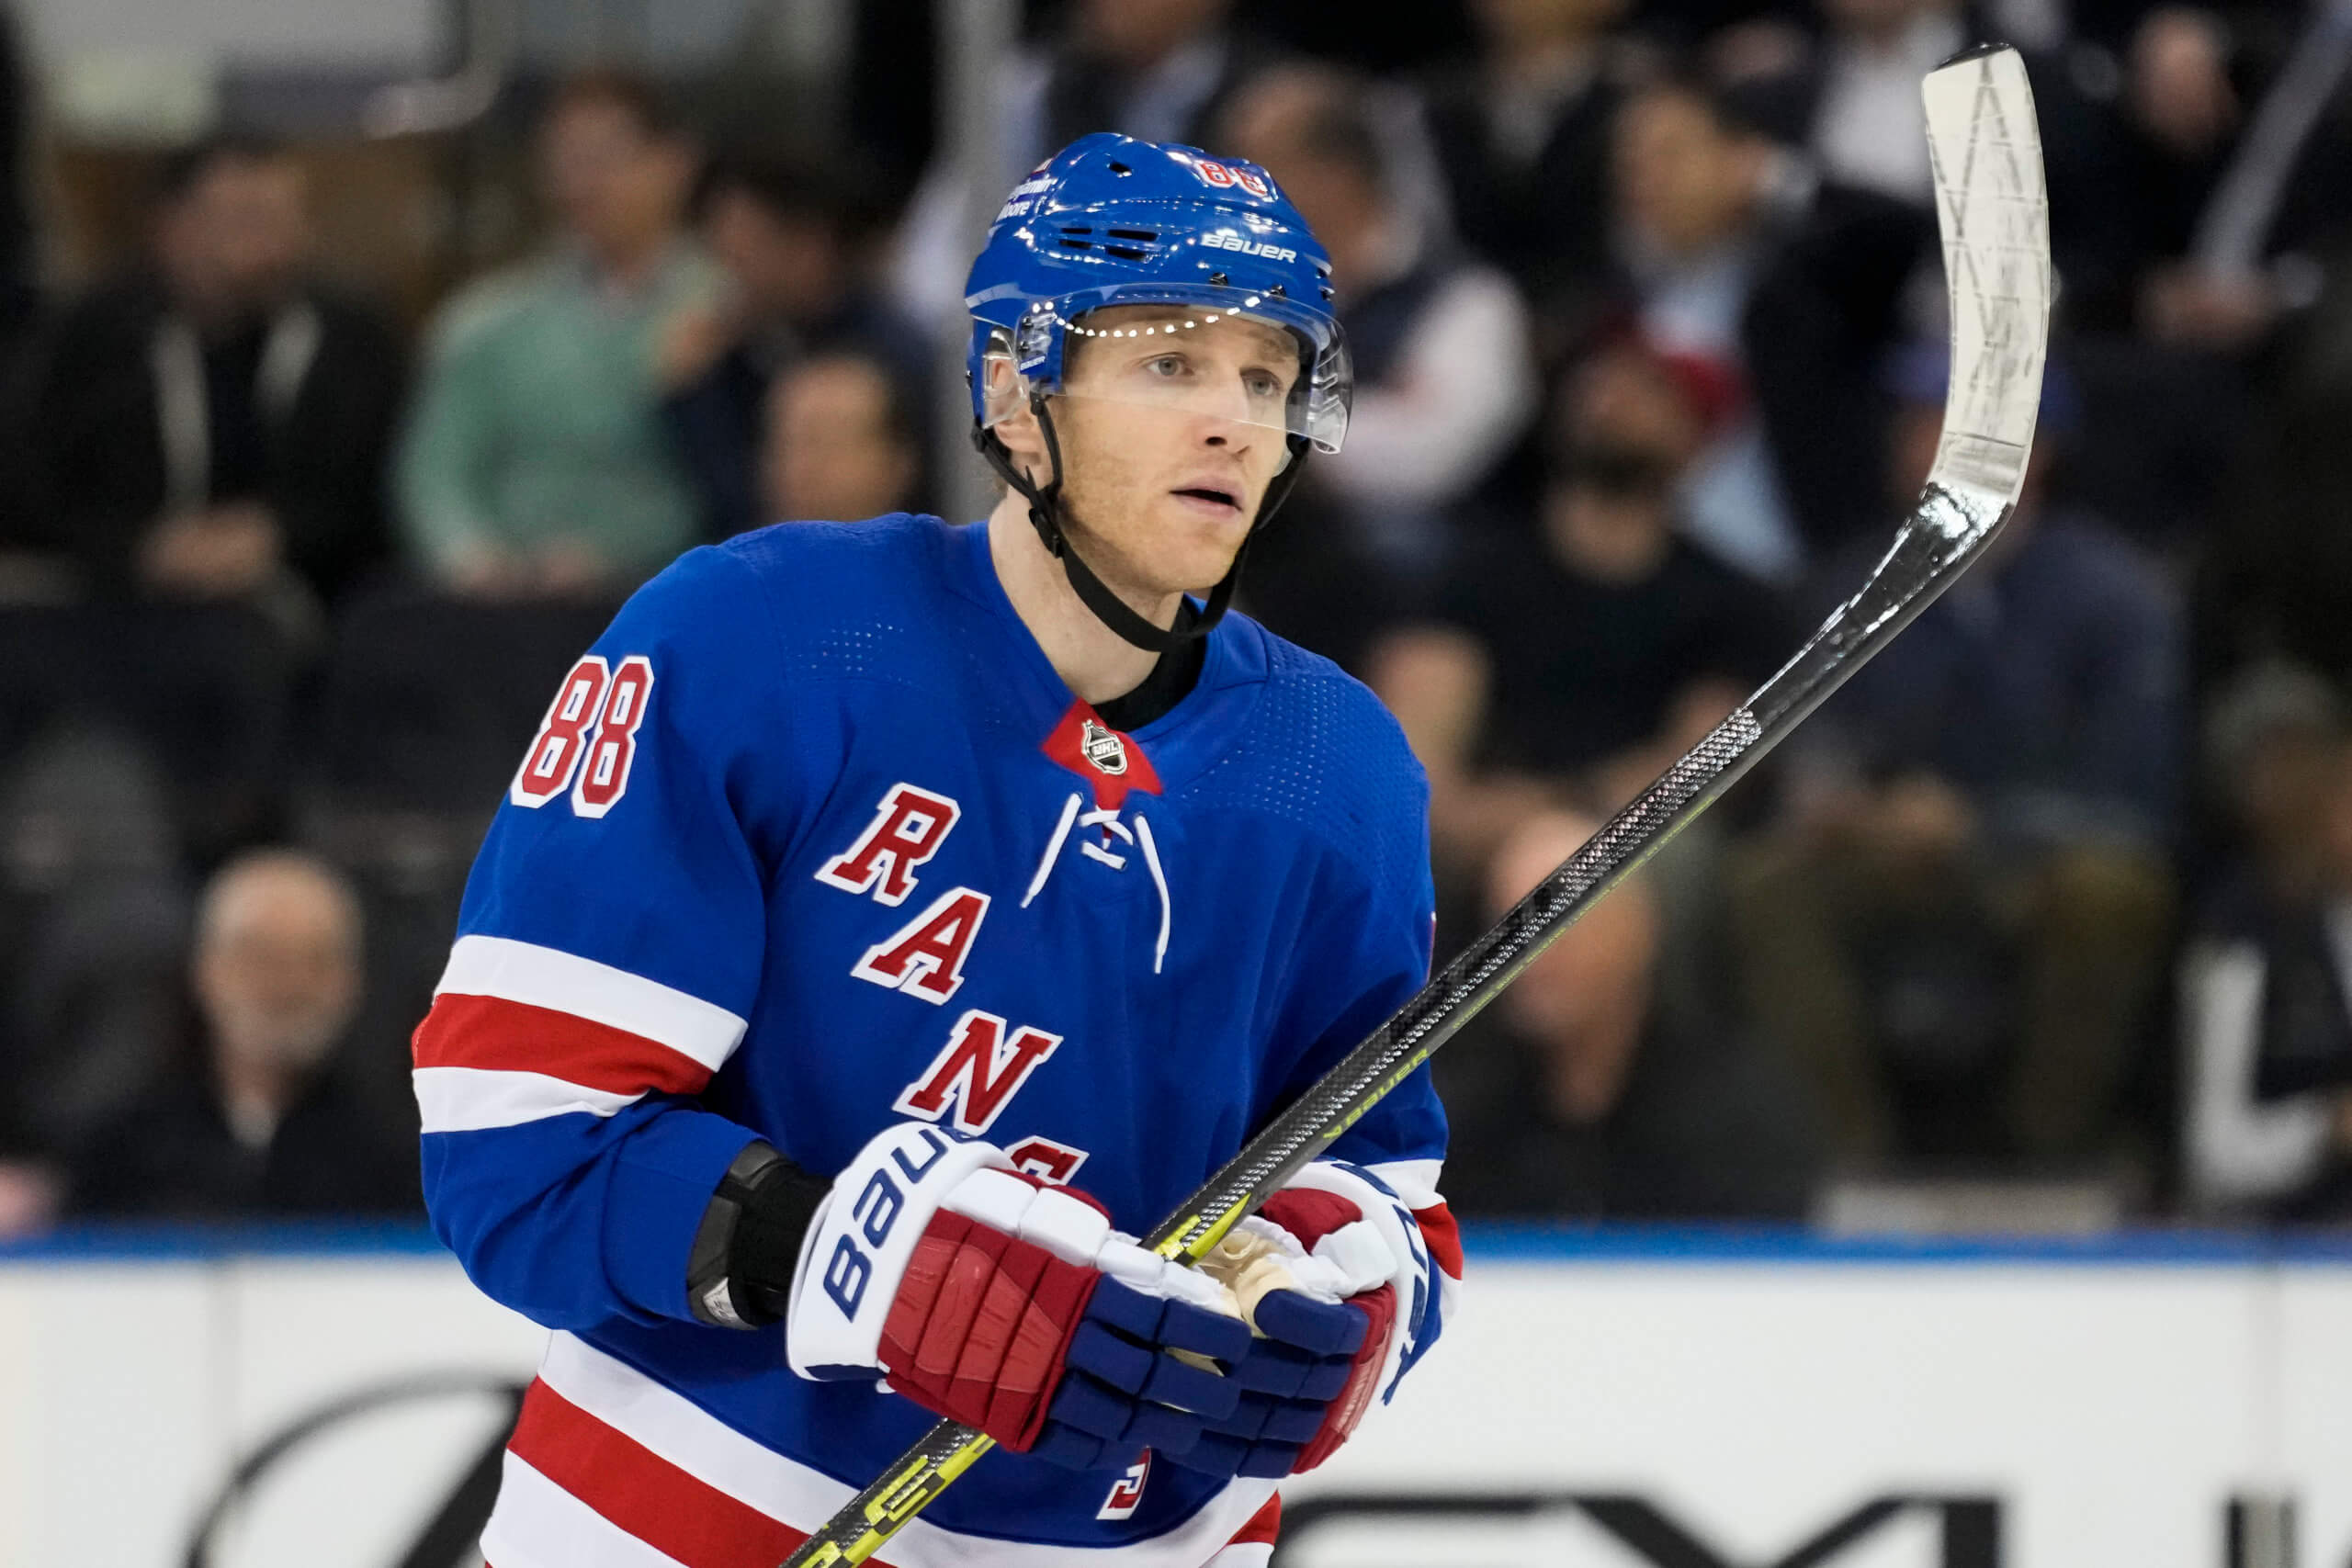 Join the Passionate New York Rangers Fans on Bleacher Report